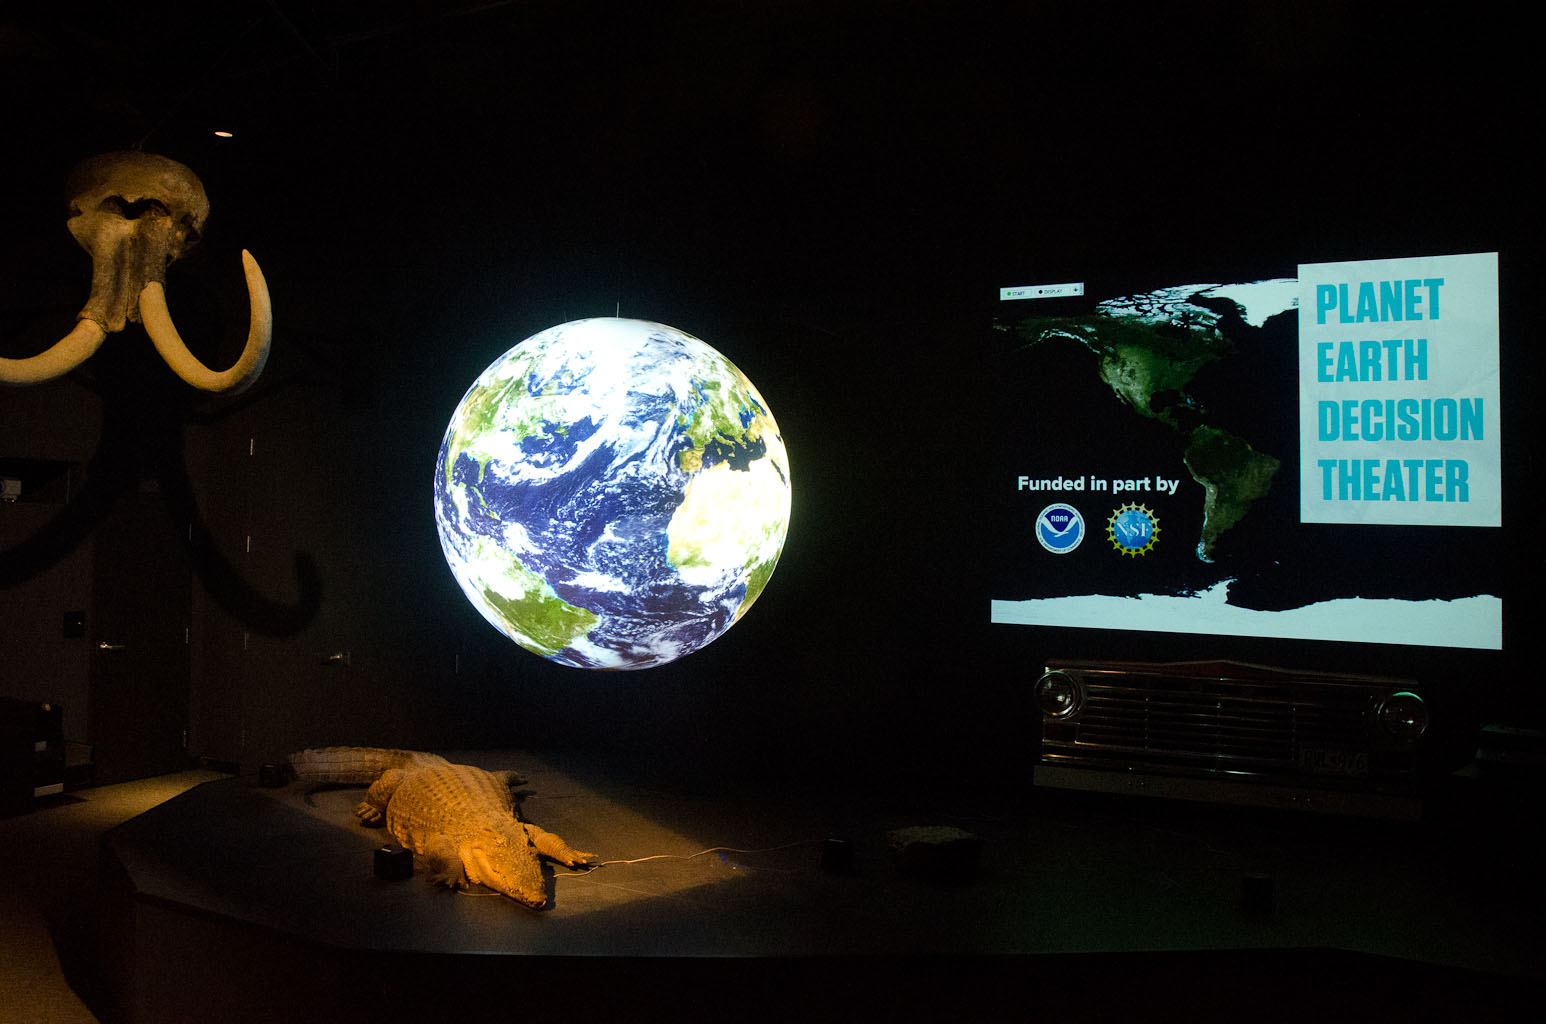 Science On a Sphere hangs in a darkened room. To the left is an elephant skull, and beneath the Sphere is a crocodile. To the right is a digital display reading 'Planet Earth Decision Theater'